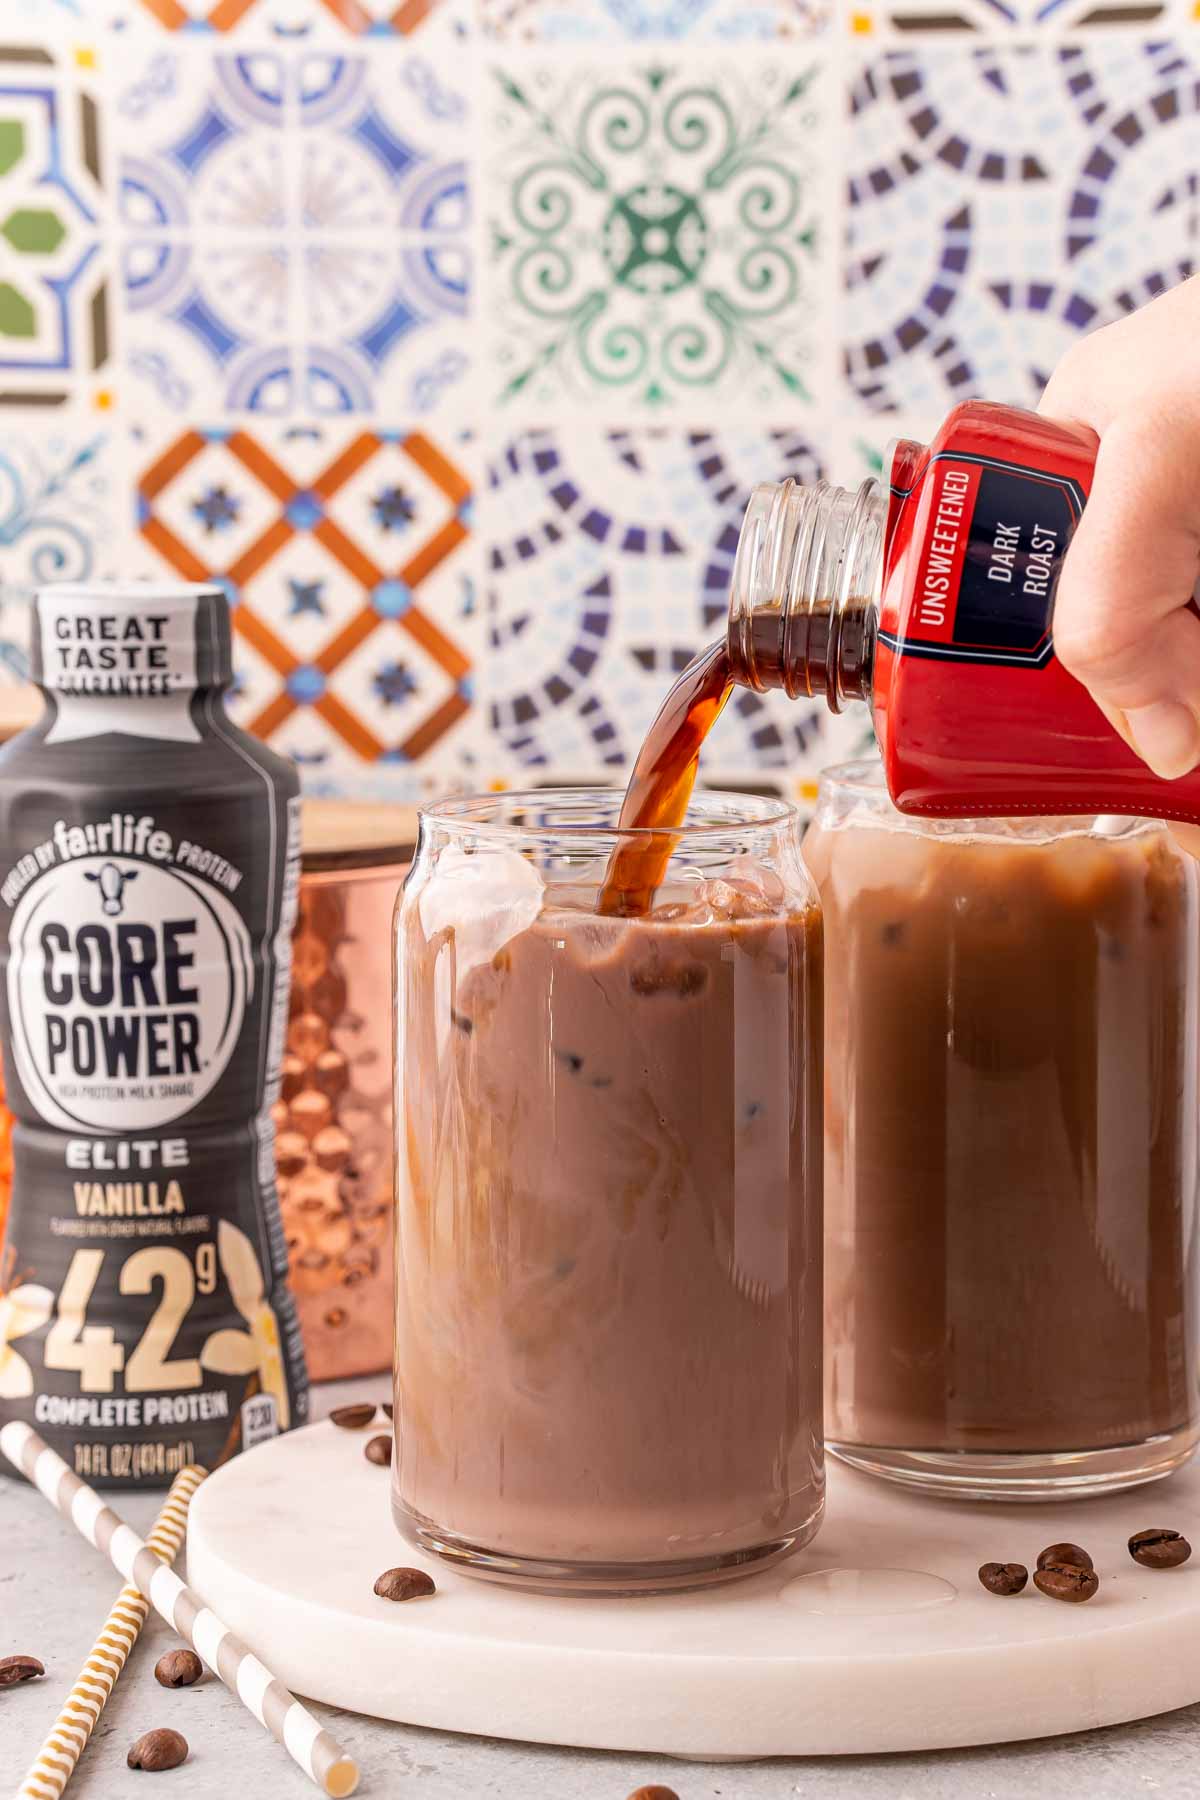 Cold brew coffee being poured into a glass with a chocolate protein shake to make proffee.